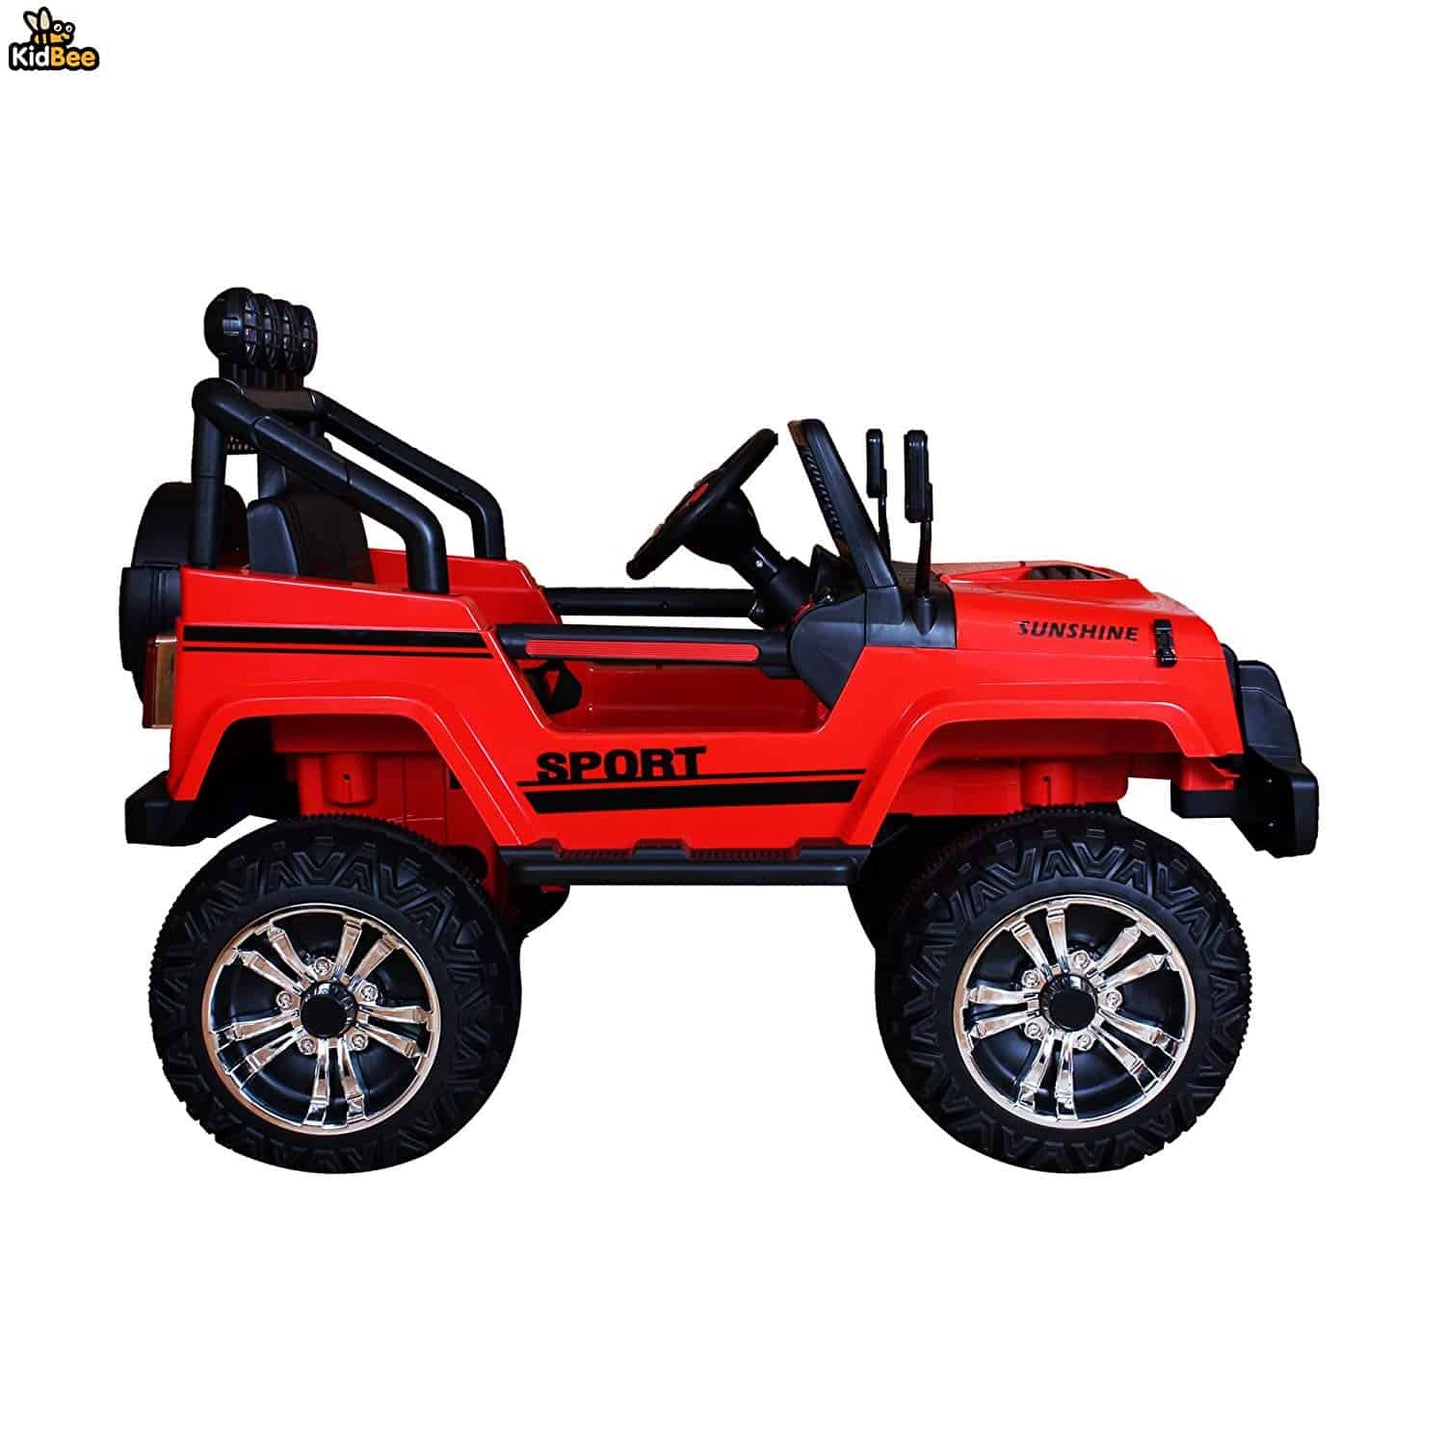 12V Electric-Ride On jeep-Truck with Big wheels, Remote Control, Additional Upper Bar Headlight - White